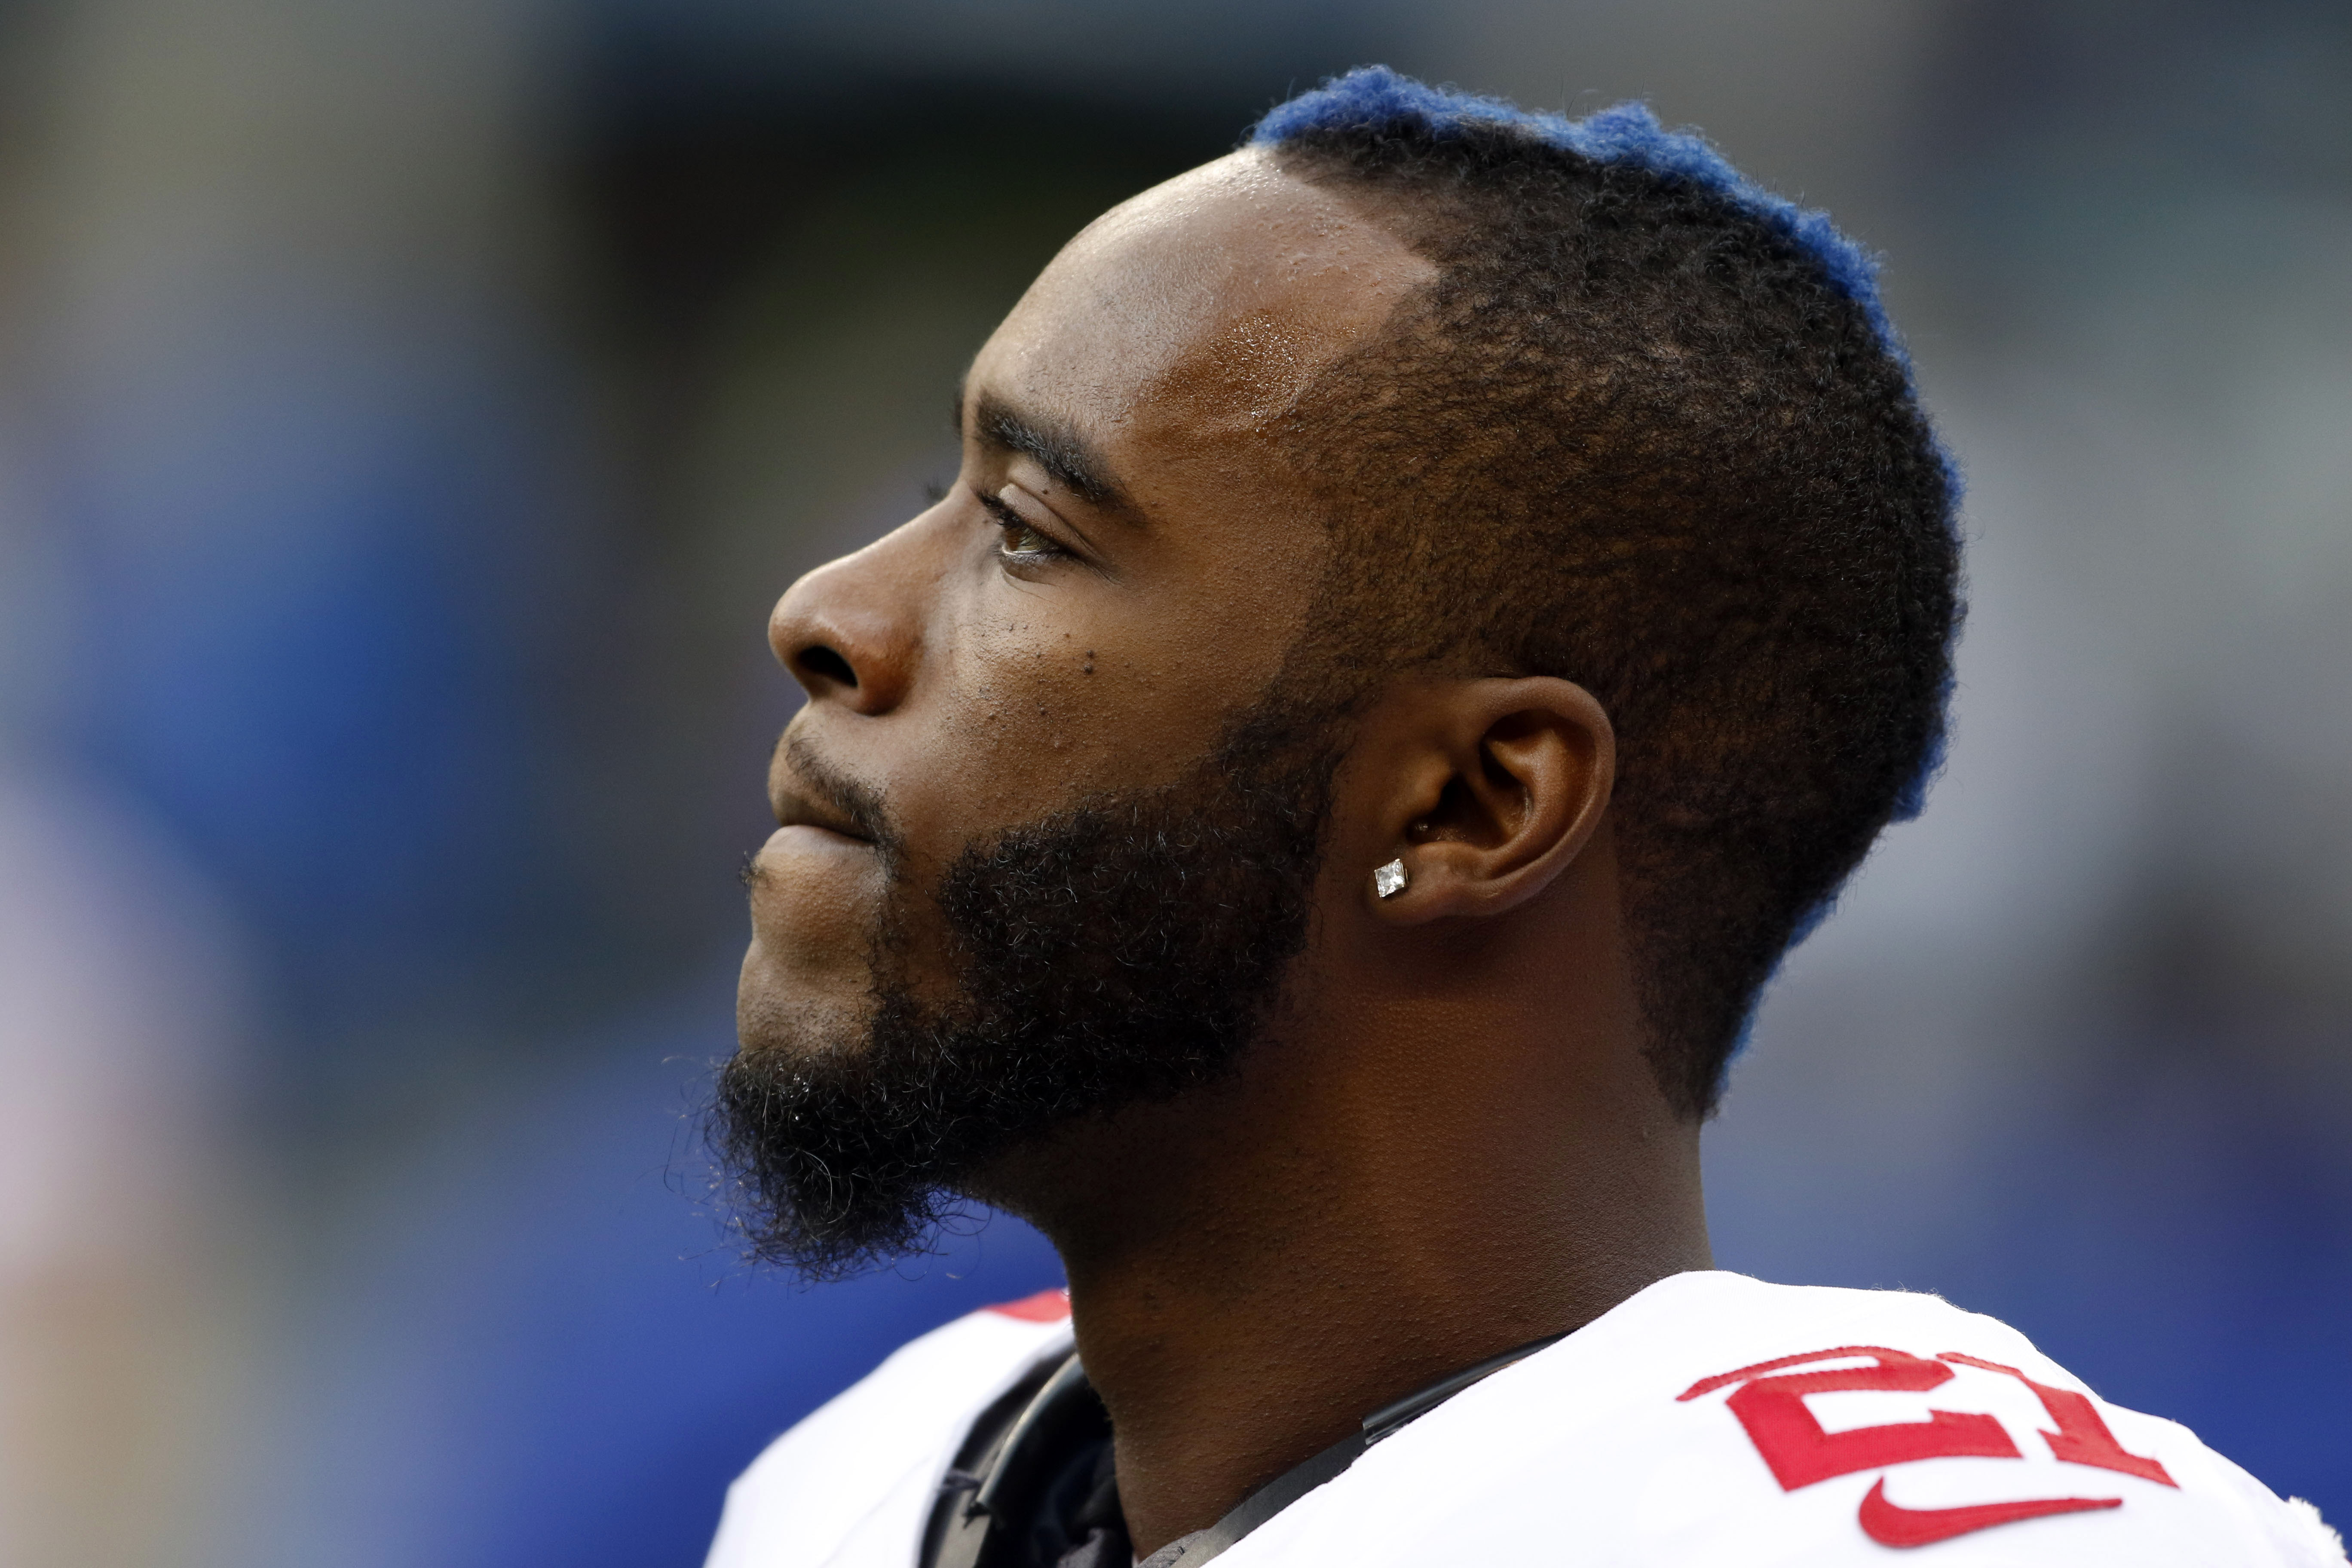 Dominique Rodgers-Cromartie is heading into his second season with the Giants.